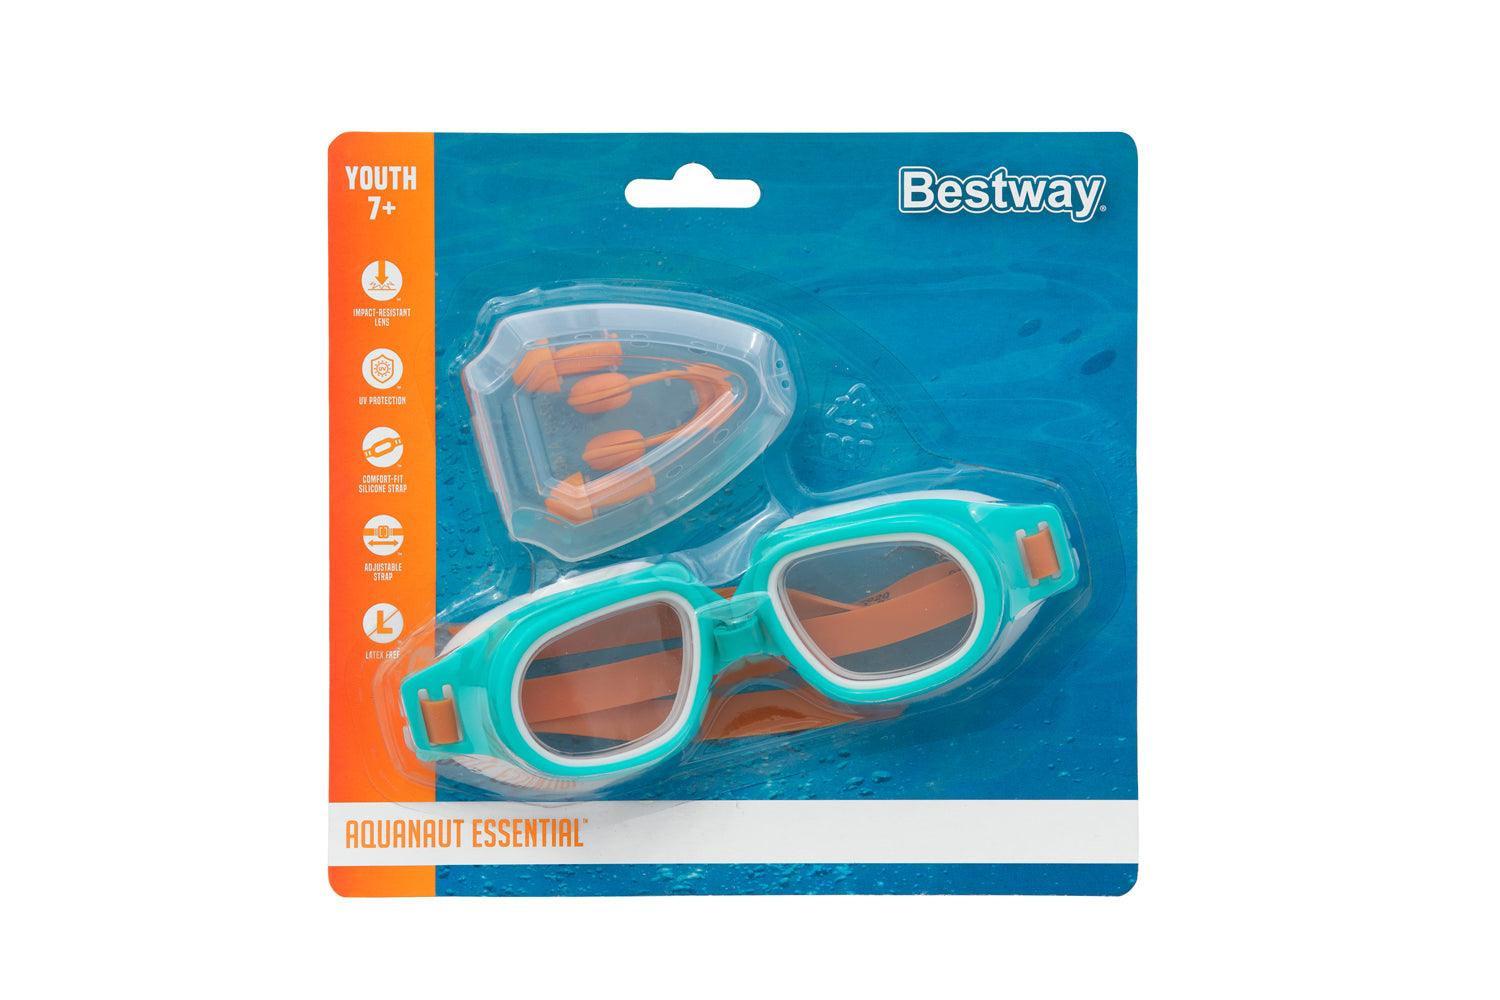 Bestway Aquanaut Essentialâ„¢ protection set from 7 years - Ourkids - Bestway